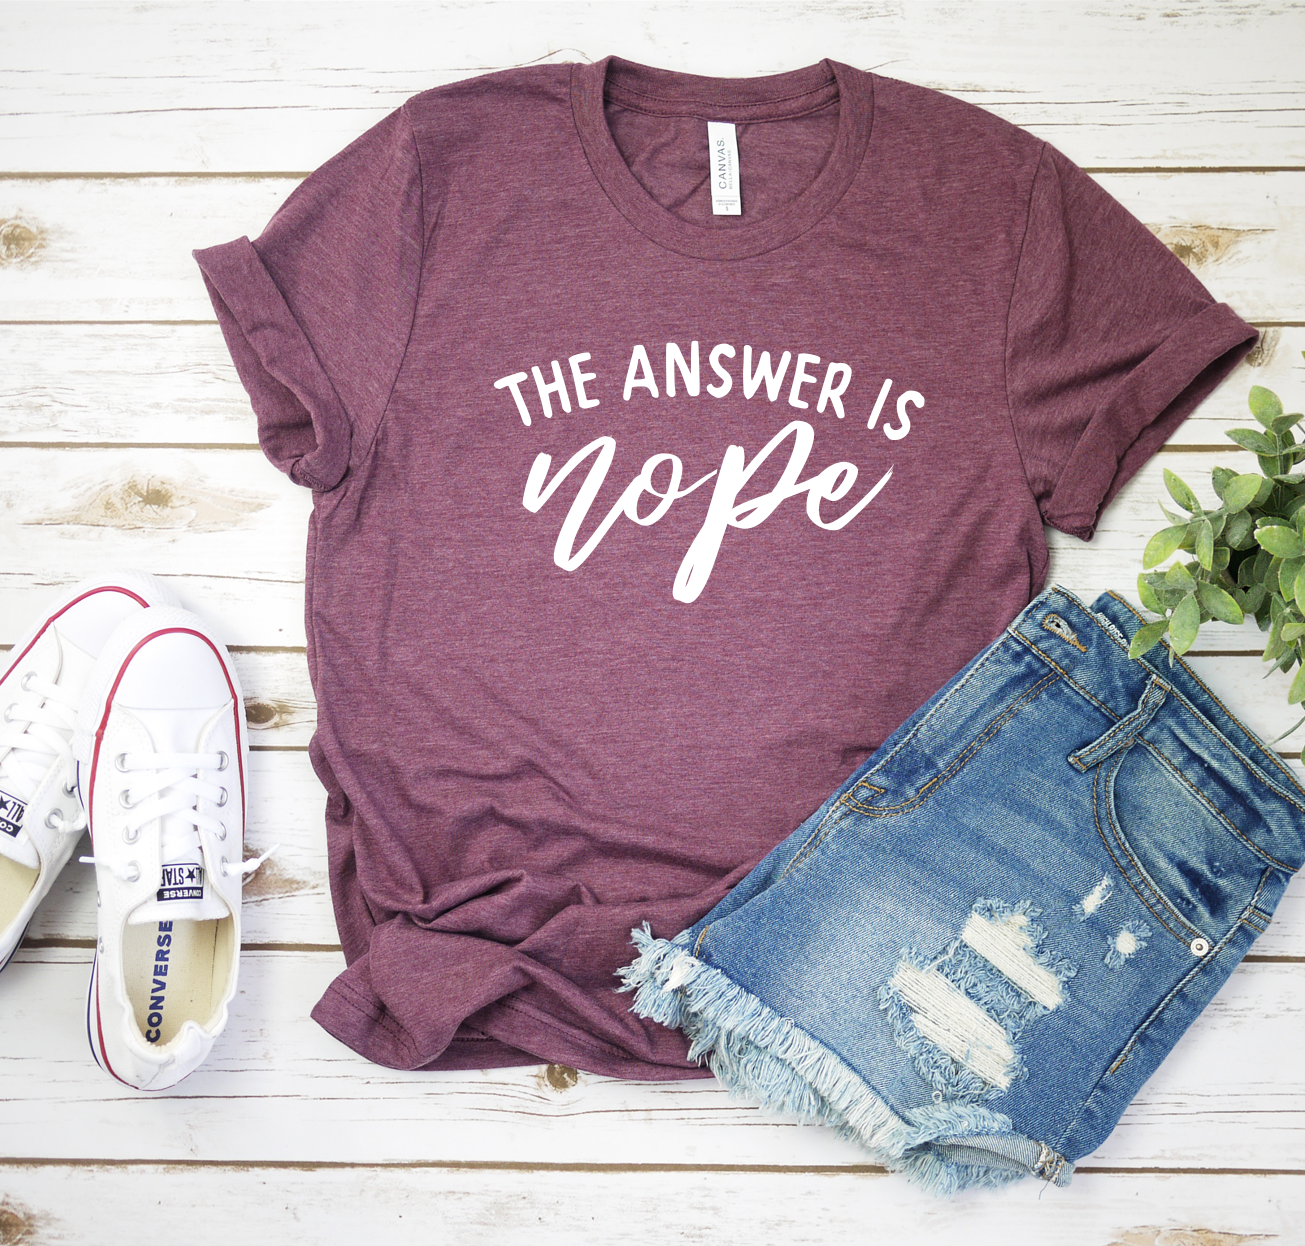 nope. Not Today Letter Print T-shirts, V-neck Sleeve Fashion Top